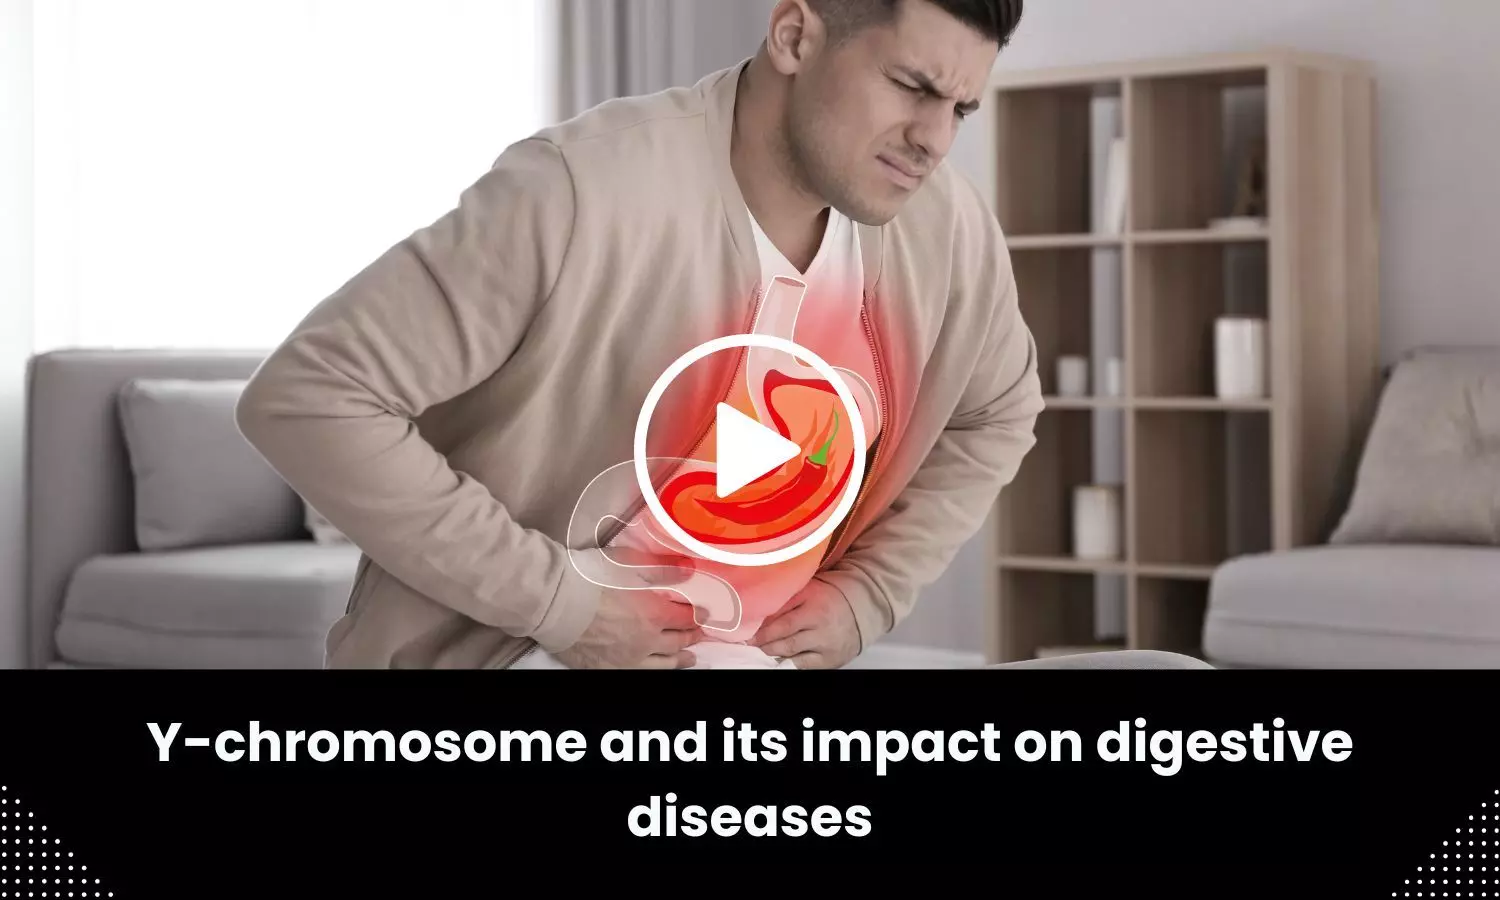 Y-chromosome and its impact on digestive diseases